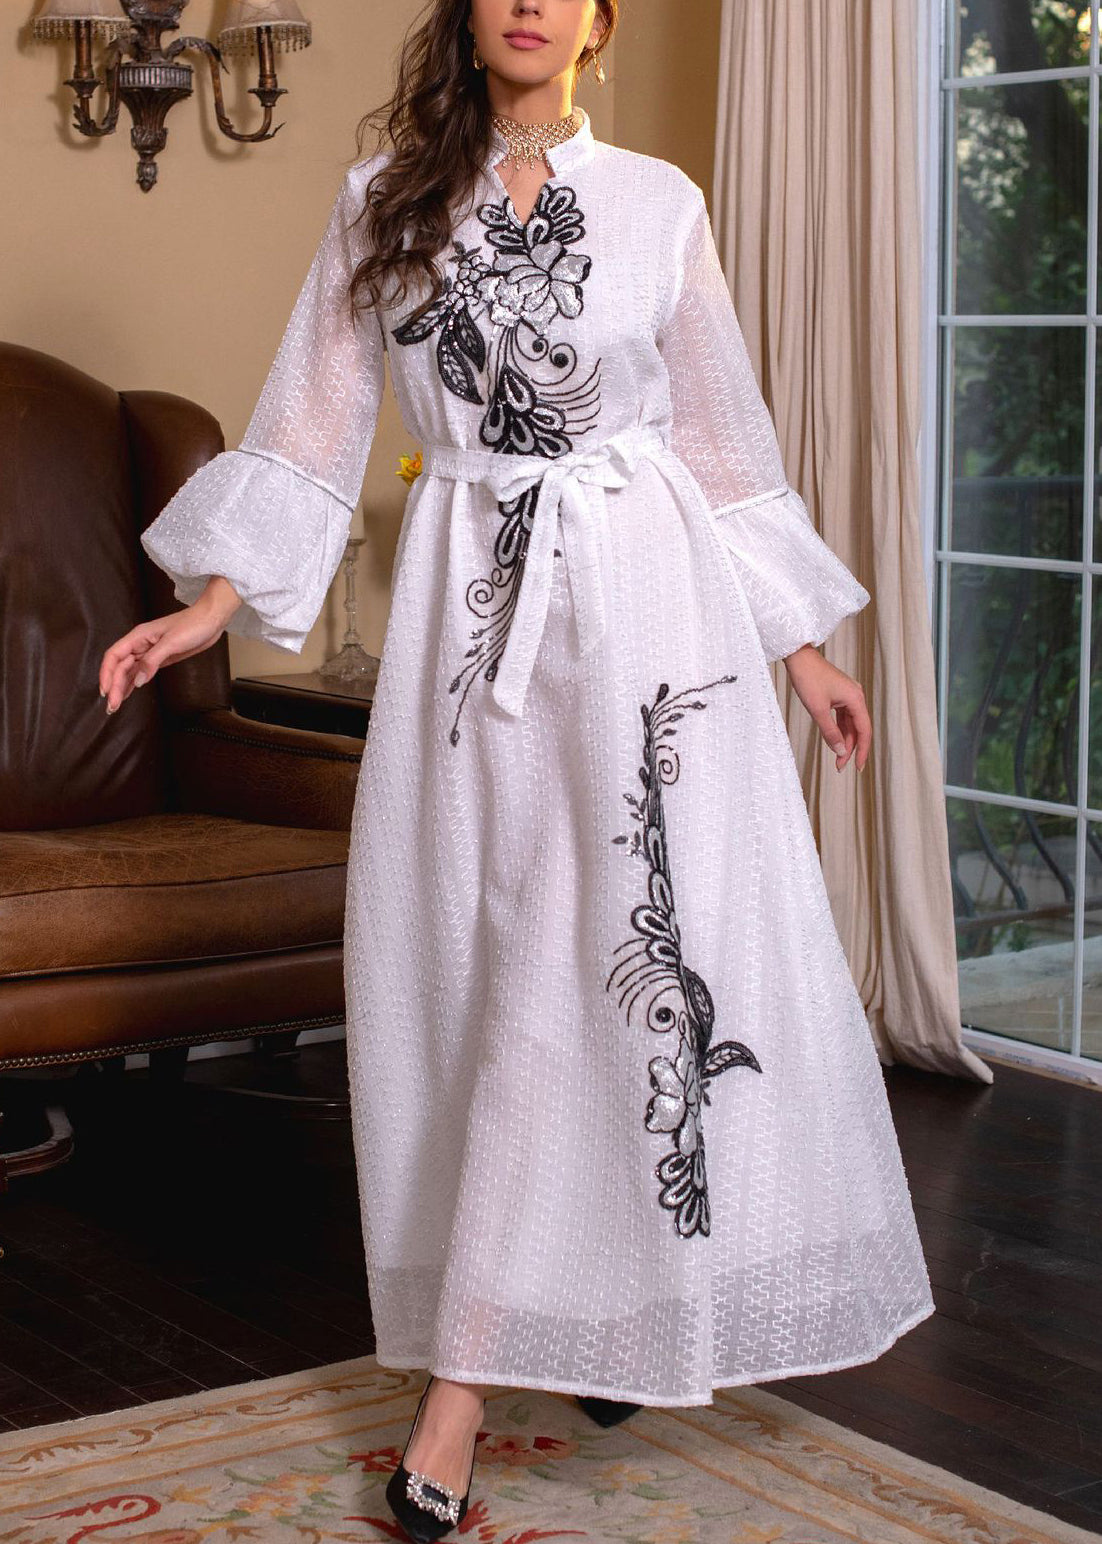 Loose White Embroidered Tie Waist Long Dresses Puff Sleeve AA1038